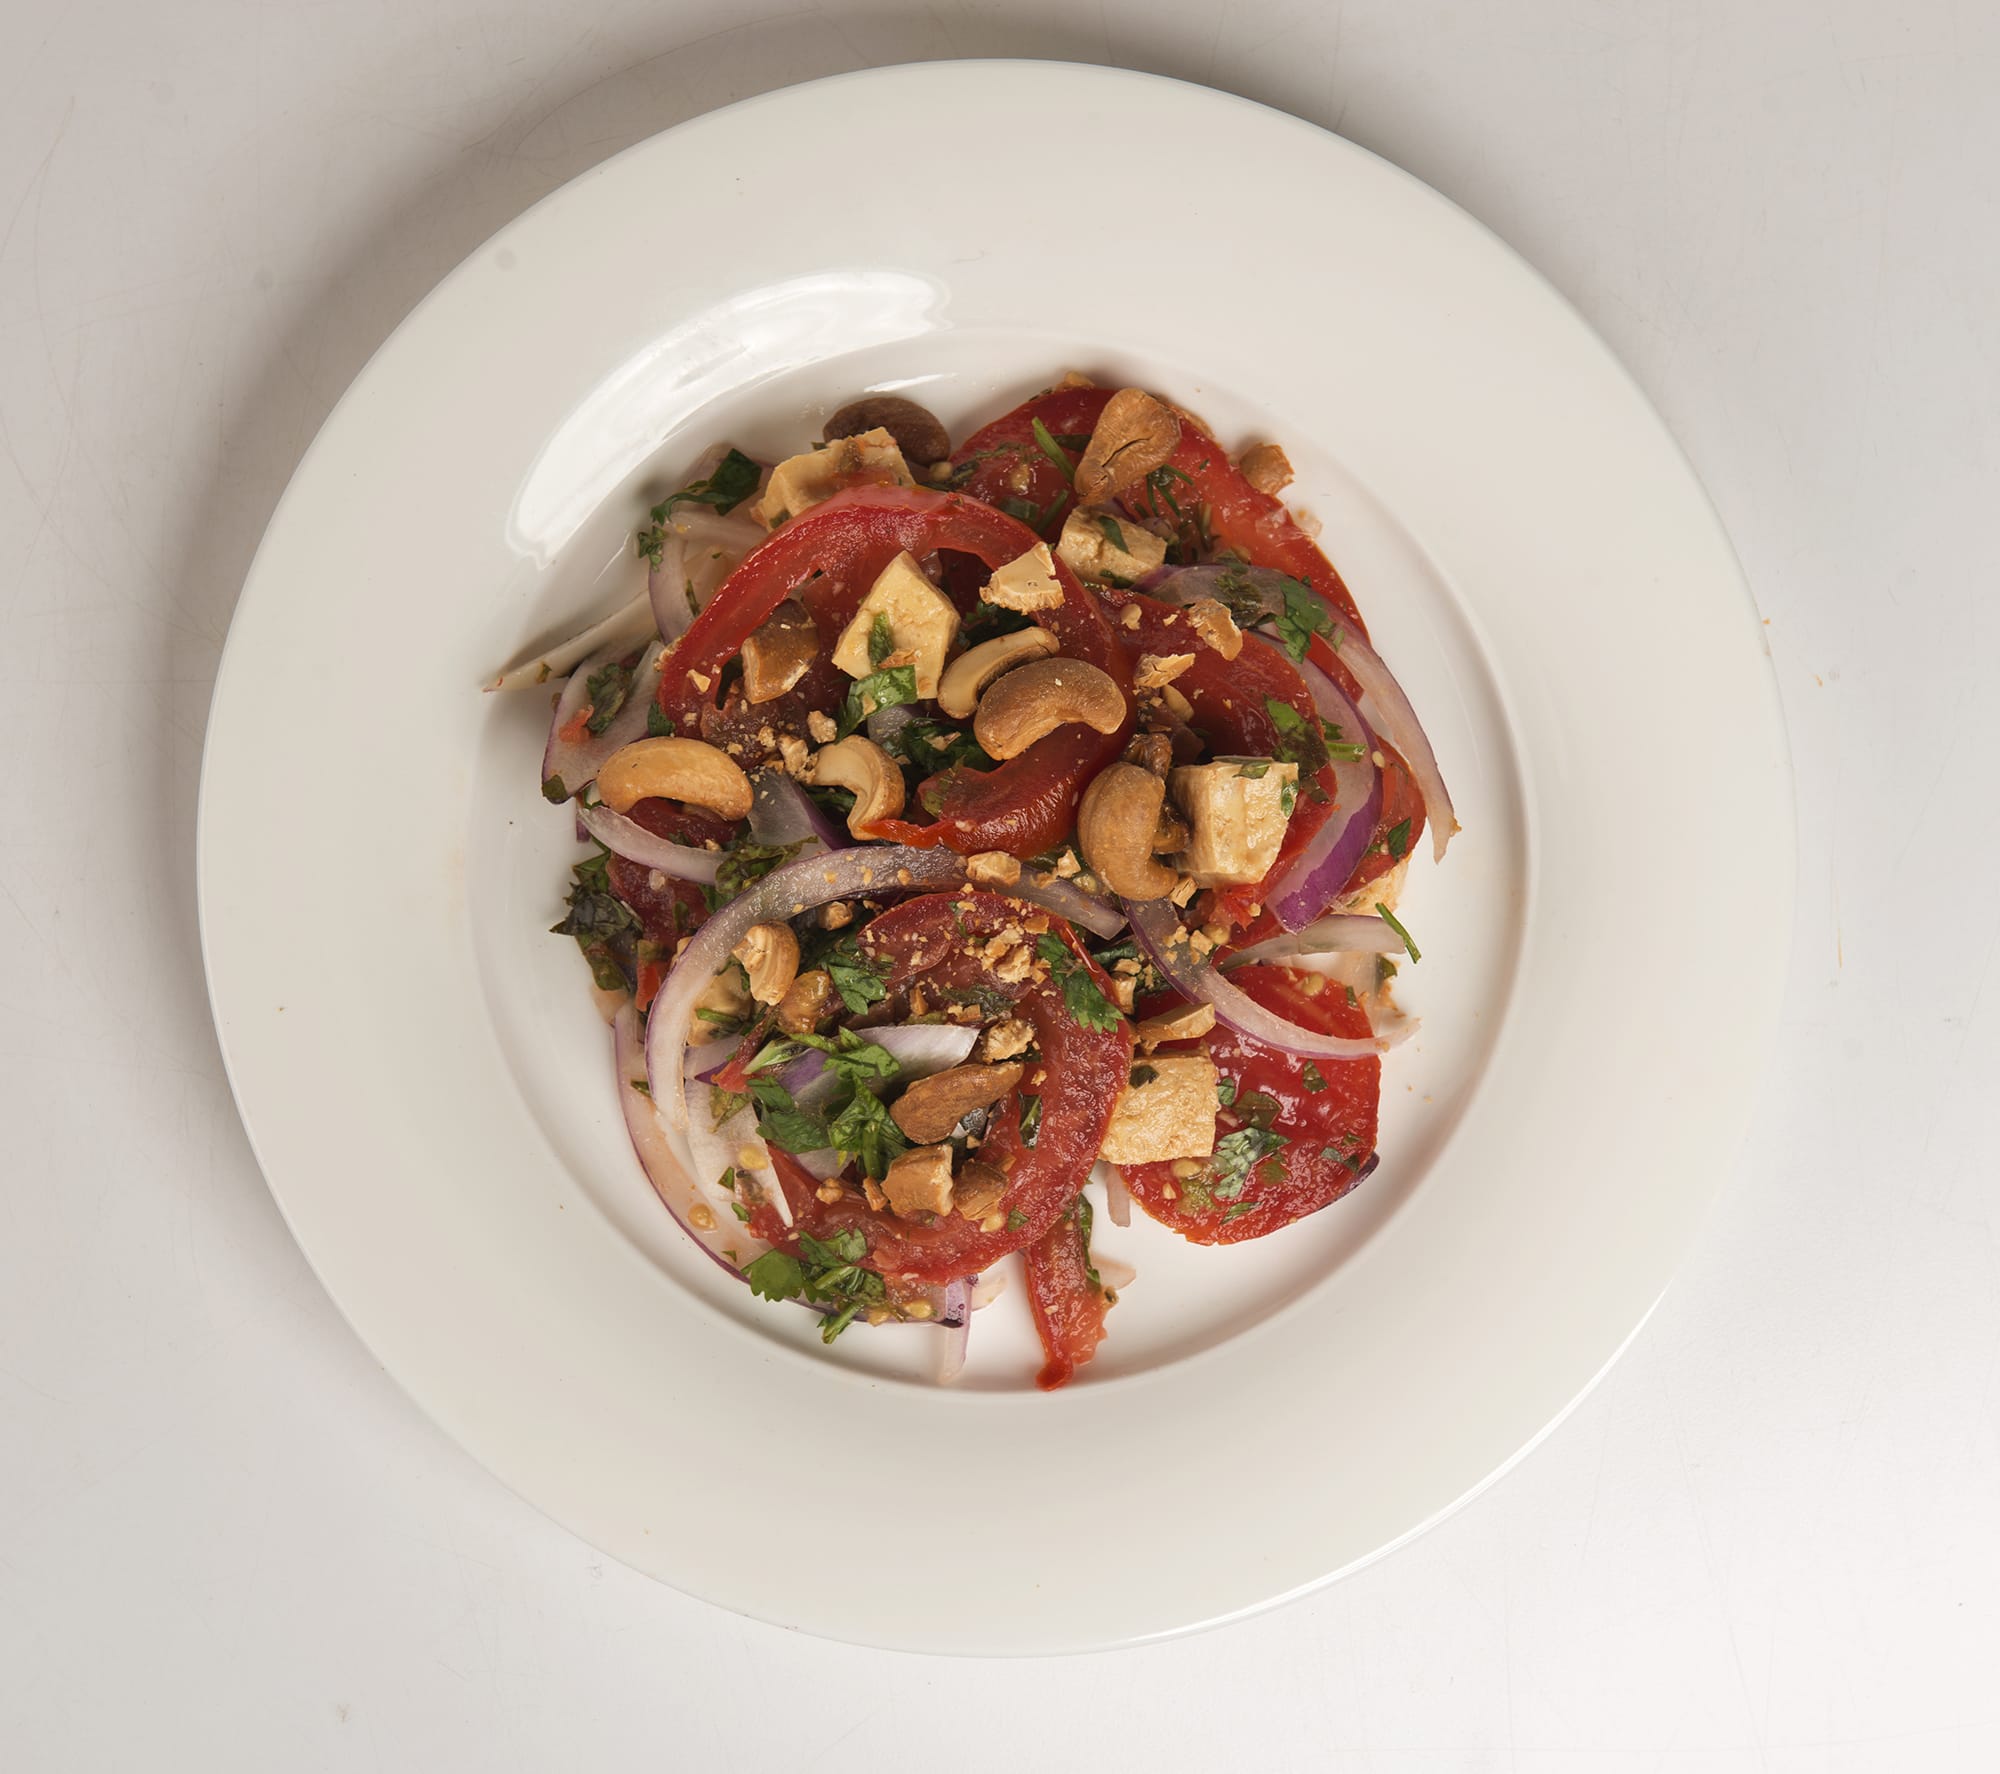 Tomato and Tofu Salad balances sweet, tart, spicy and earthy; tofu  bridges the softness of the tomatoes and the crunch of the nuts and onions.